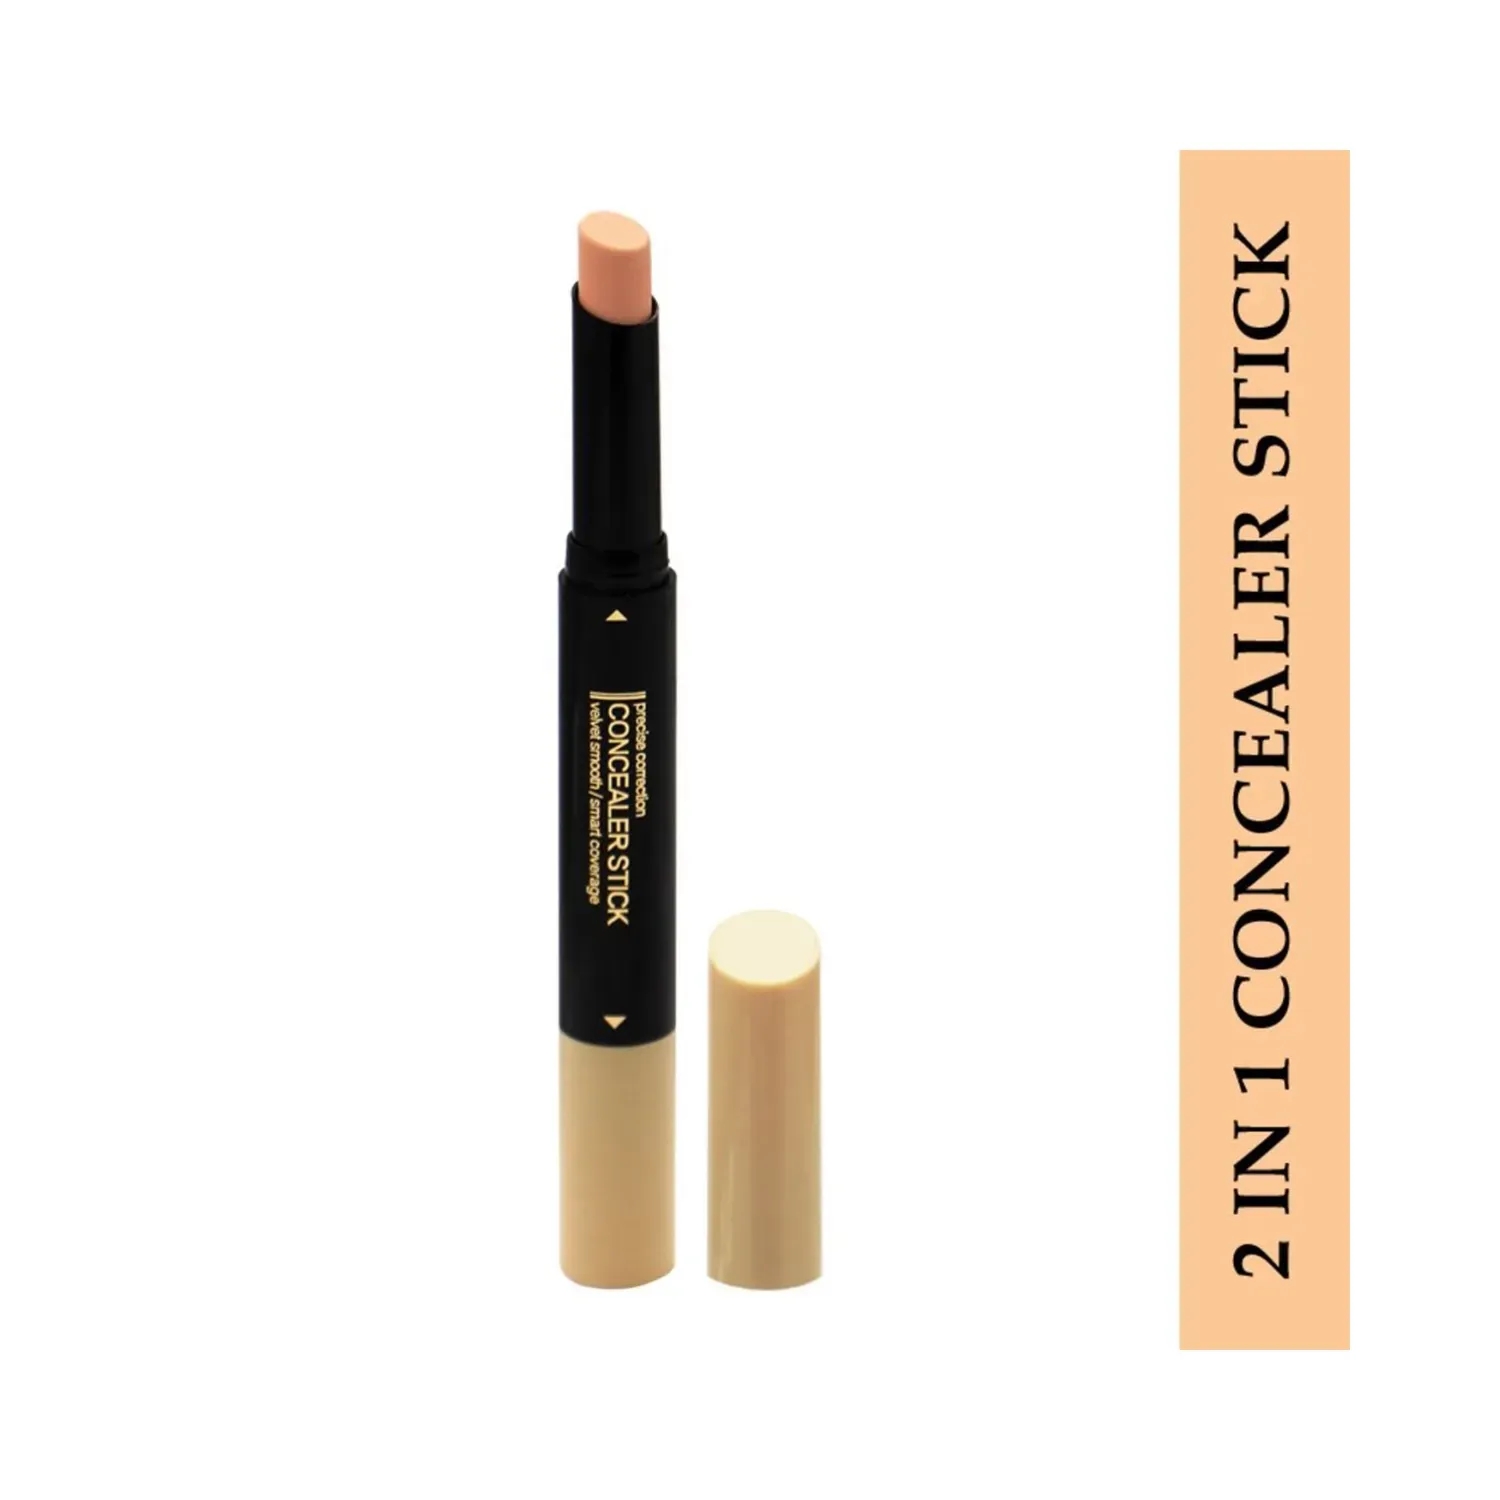 Fashion Colour | Fashion Colour Jersy Girl 2-In-1 Double Perfecting Correction Concealer Stick - 02 Shade (2.2g)